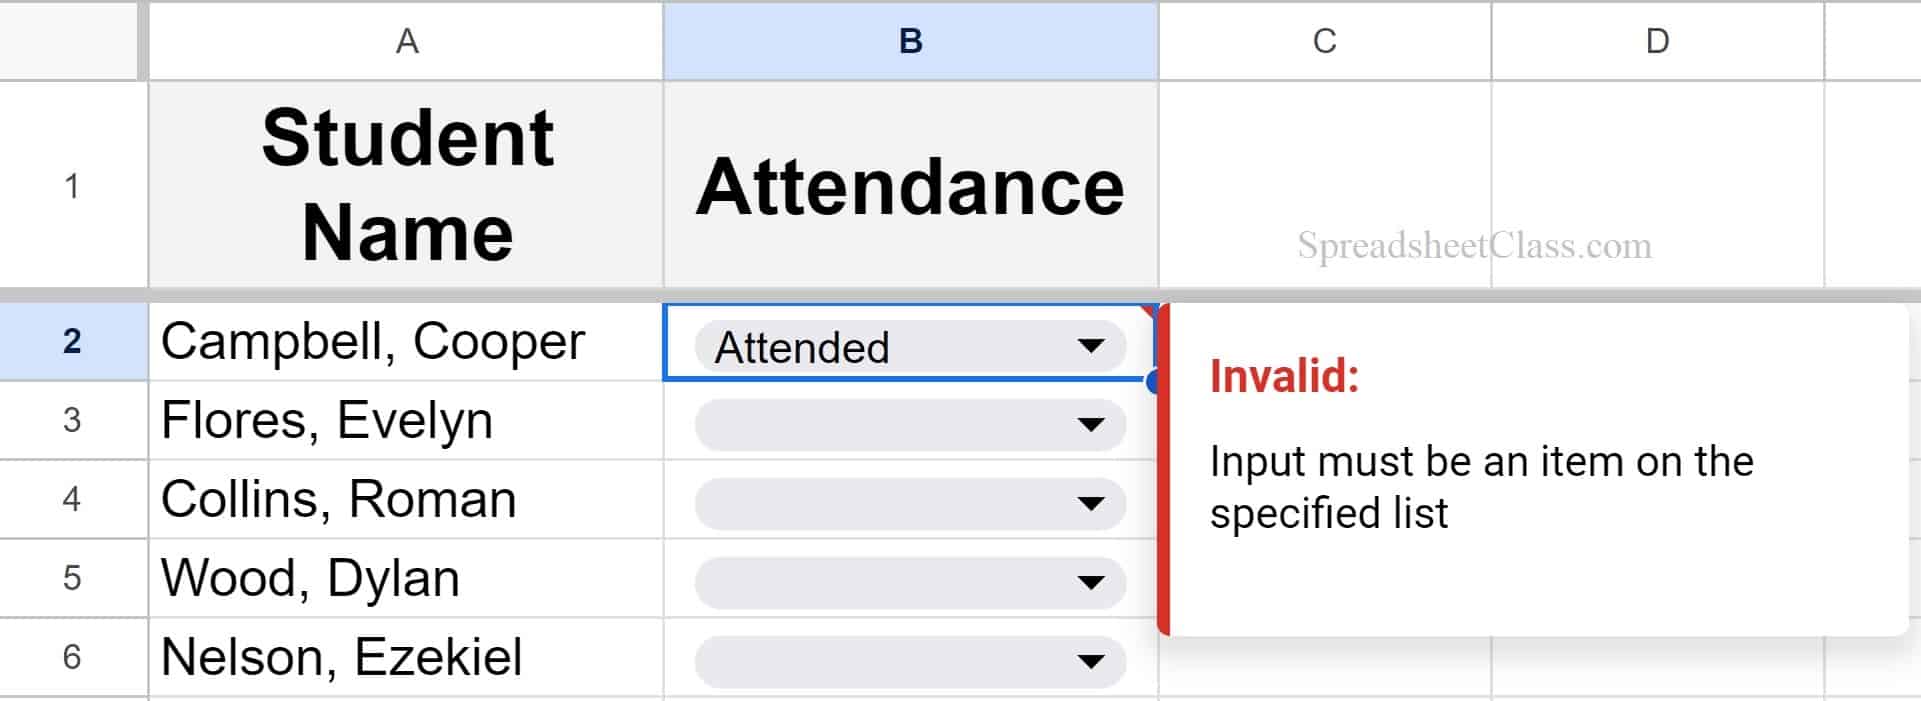 Example of input must be an item on the specified list warning in Google Sheets for data validation when show warning is selected NEW